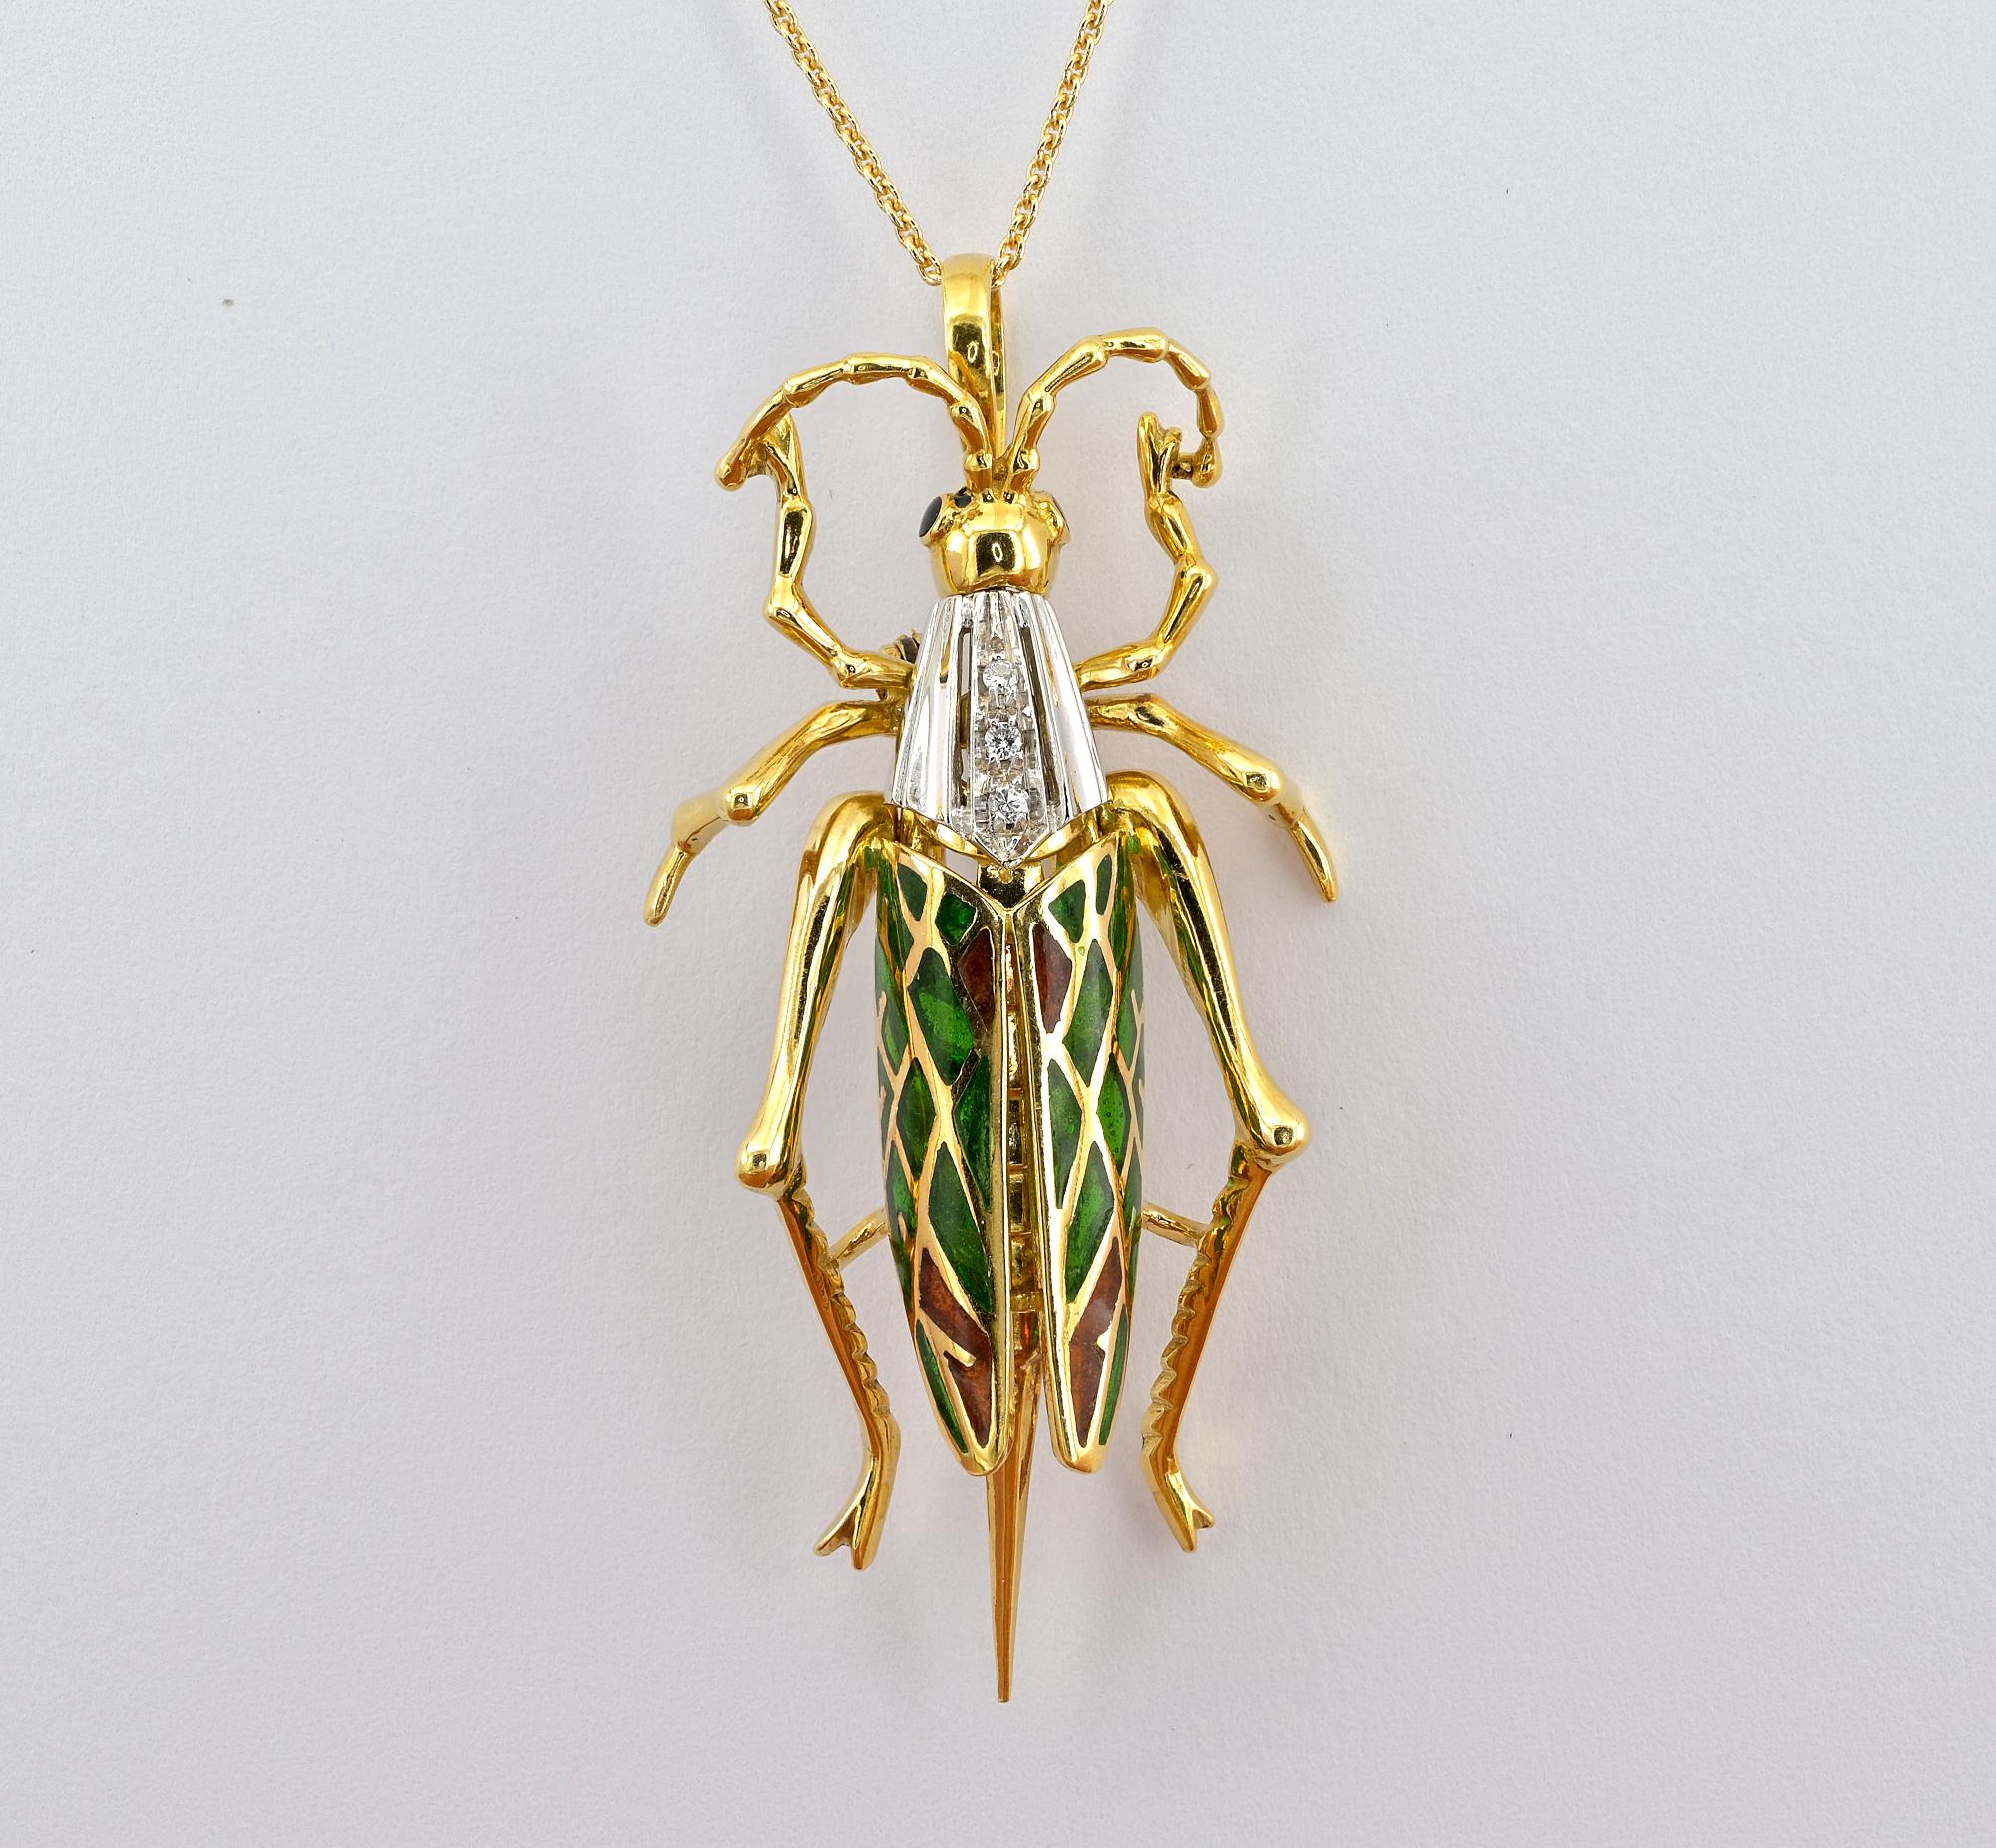 This superb Retro period Grasshopper brooch/ pendant is 18 KT gold platinum portions
1945 ca
Hand crafted by Italian past masters is a gorgeous realistic art work of colorful Green and Brown Plique a Jour enameling, realistically done like the real